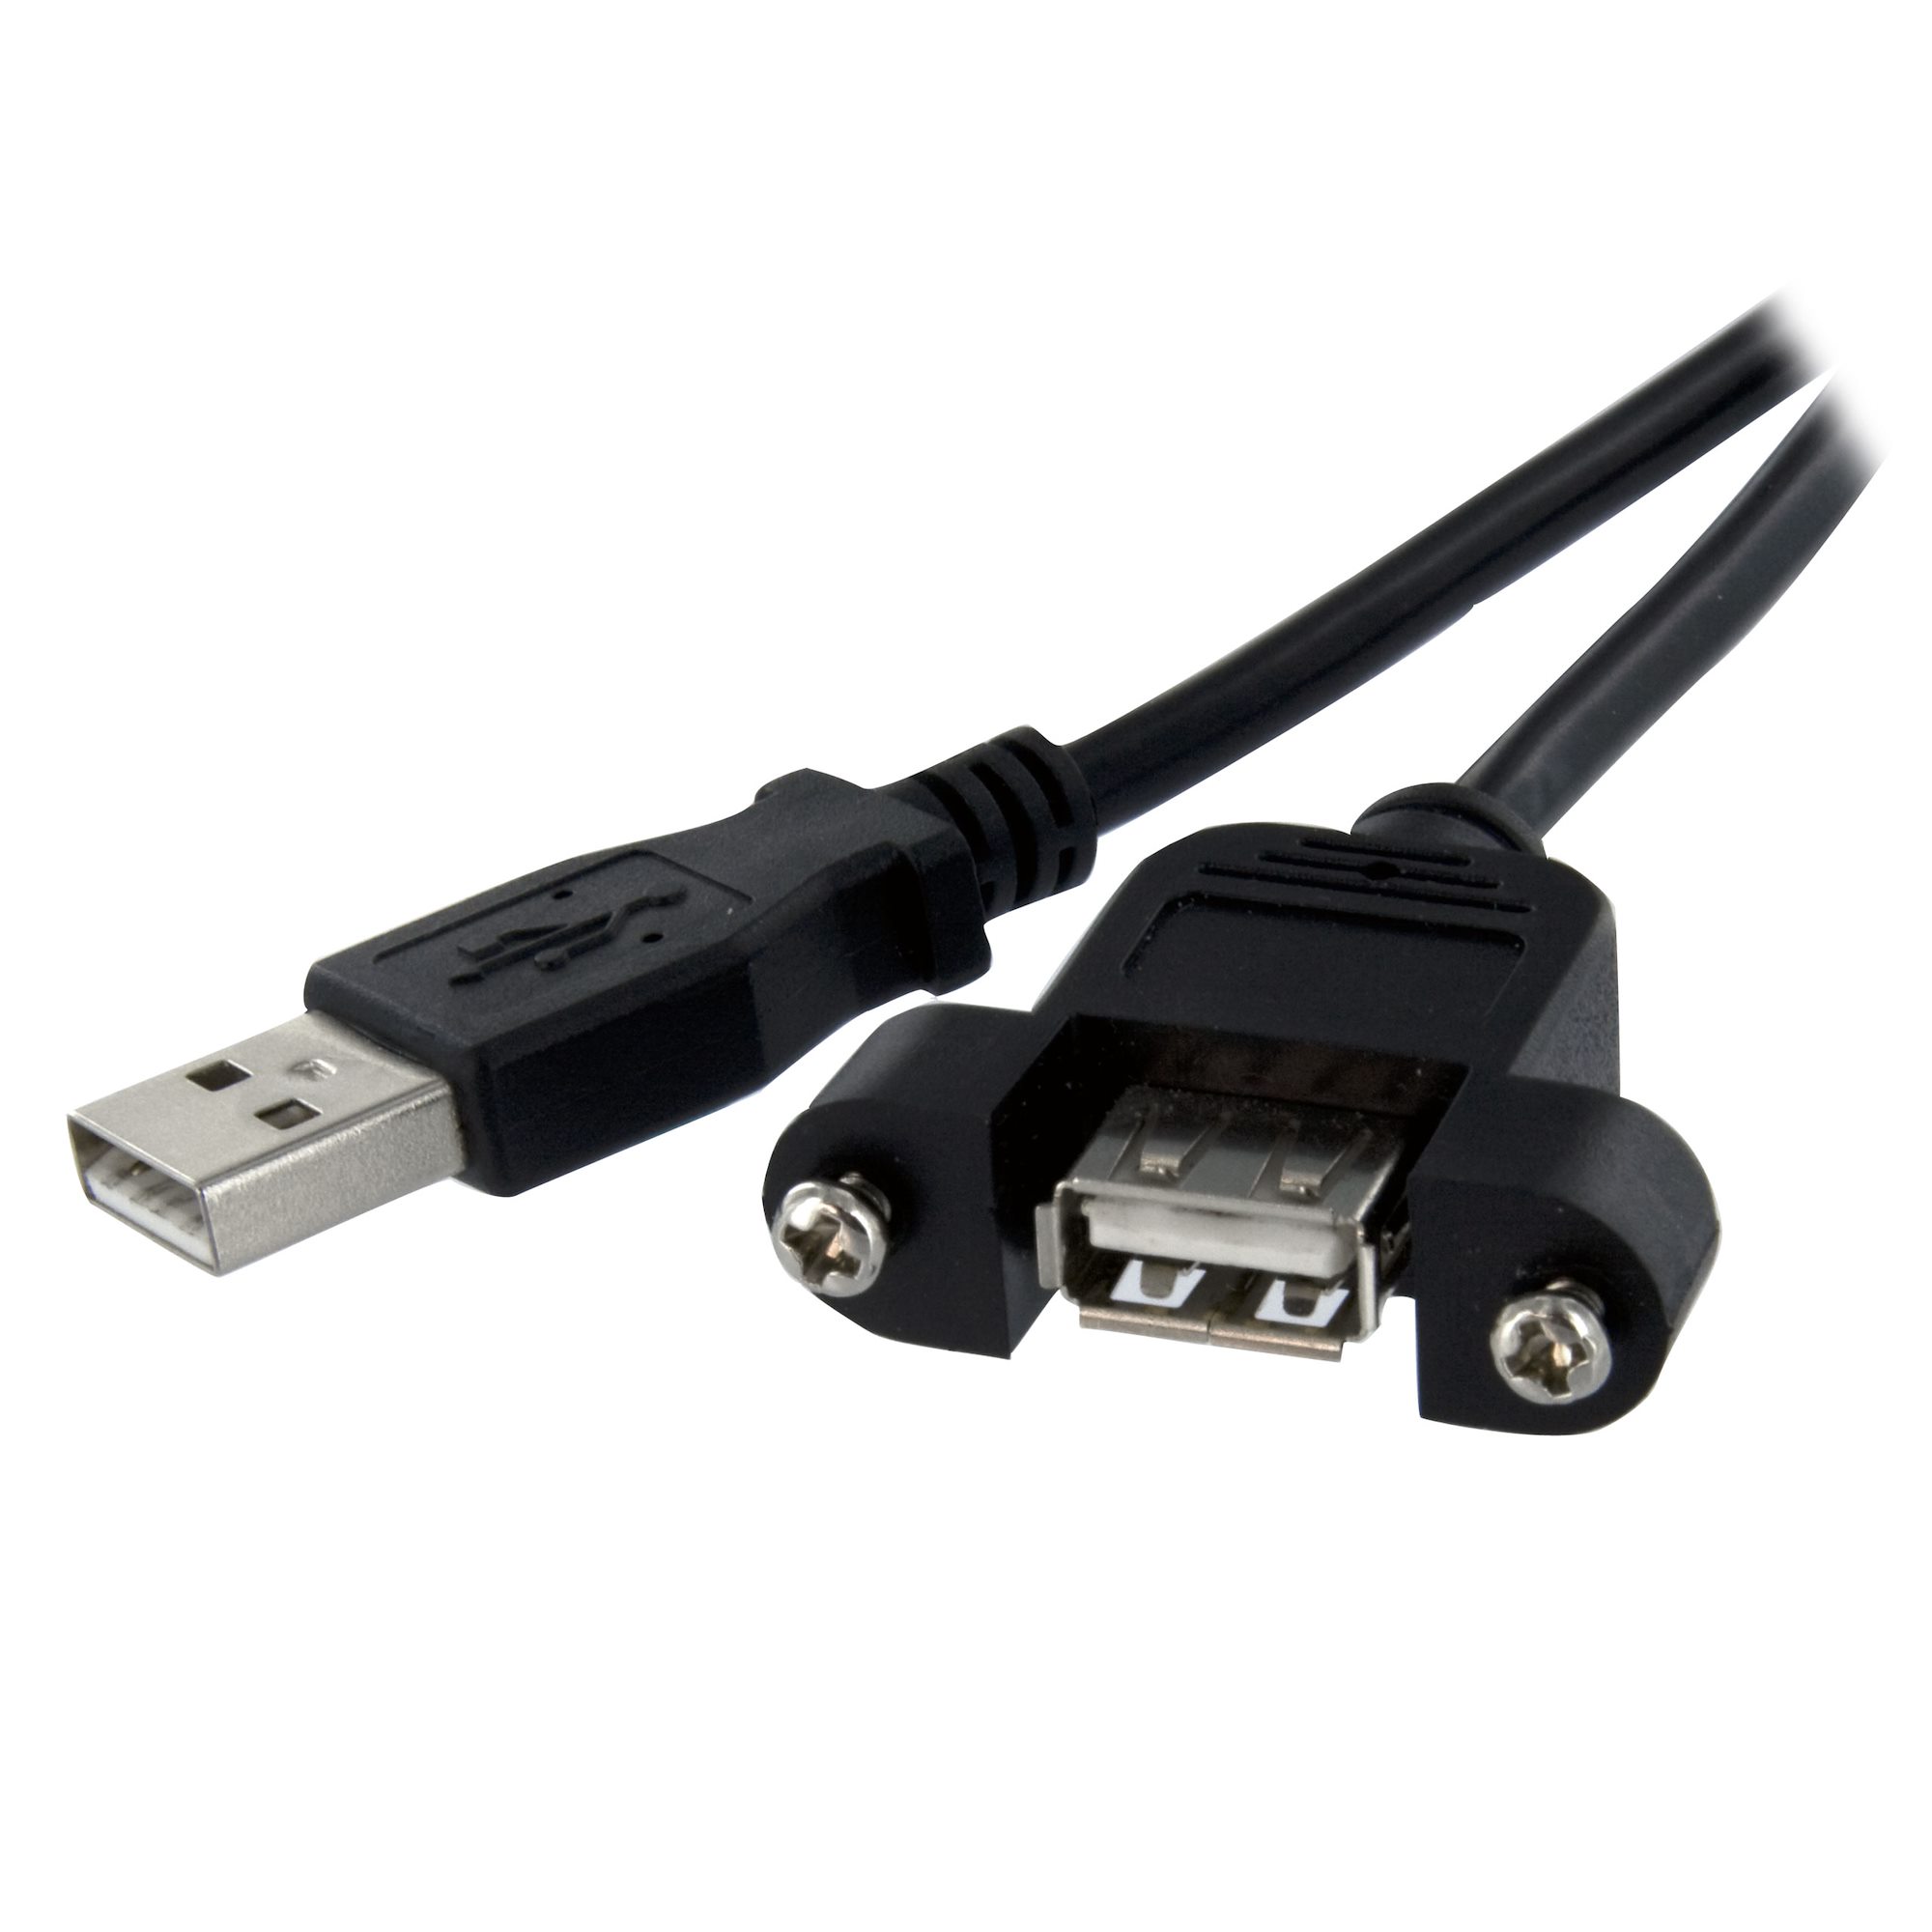 1 ft Panel Mount USB Cable A to A - F/M - Internal USB Cables & Mount USB Cables | StarTech.com